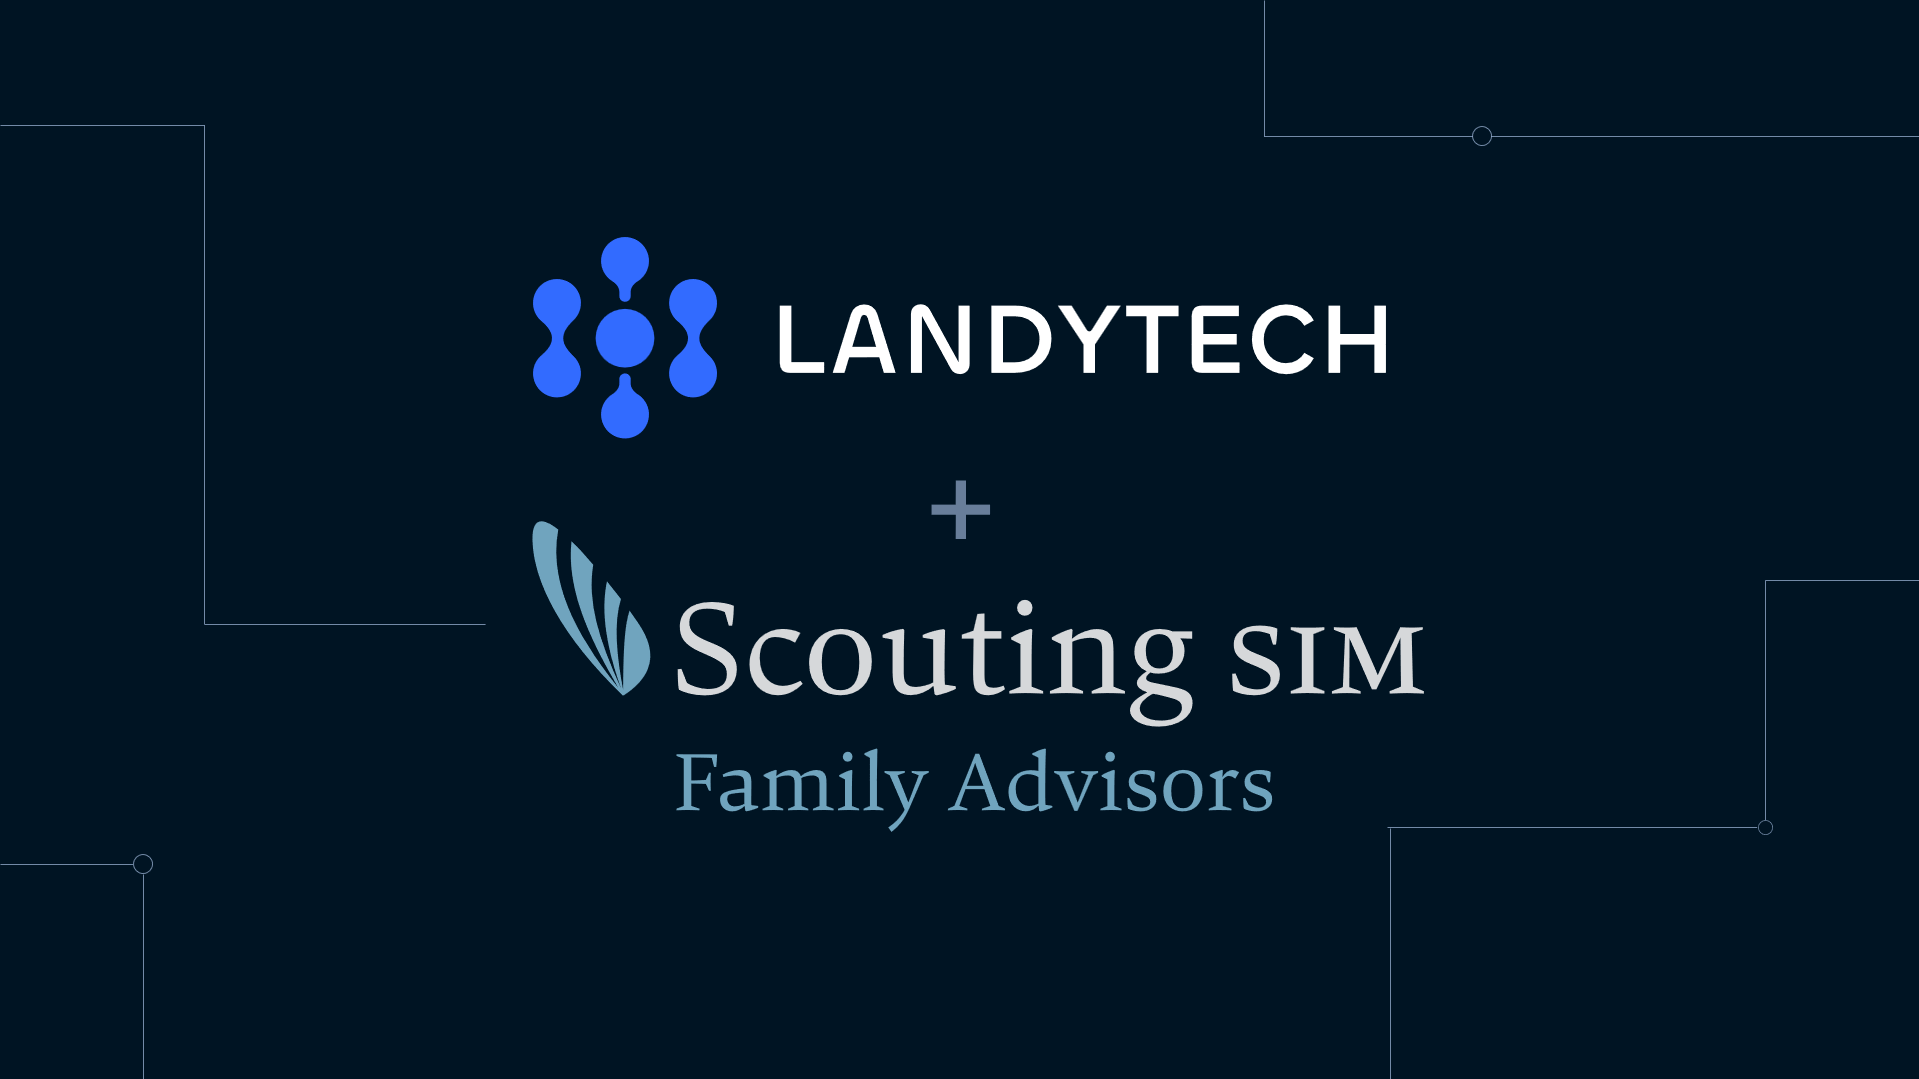 Scouting SIM Family Advisors partners with Landytech for innovative investment management